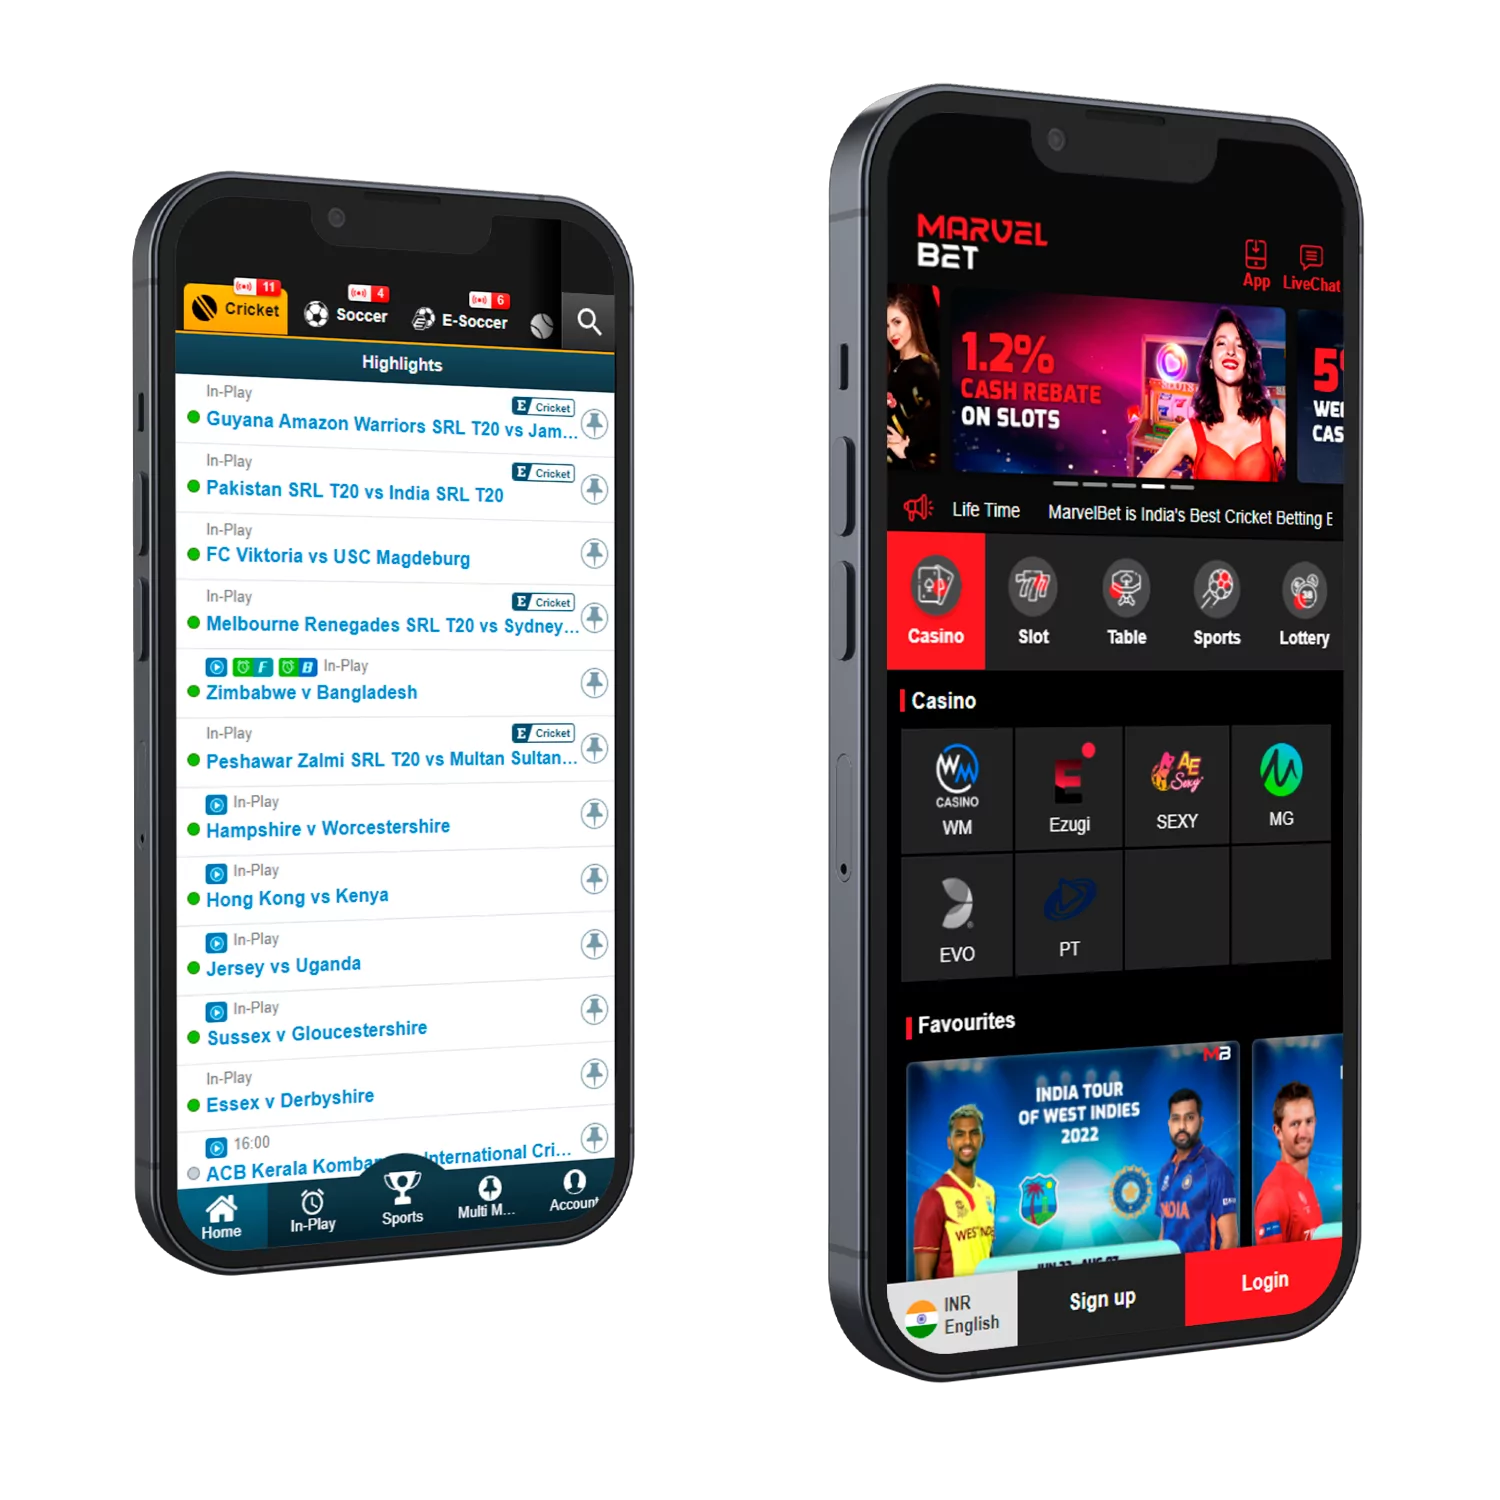 Find out about the features and bonuses of the MarvelBet app.